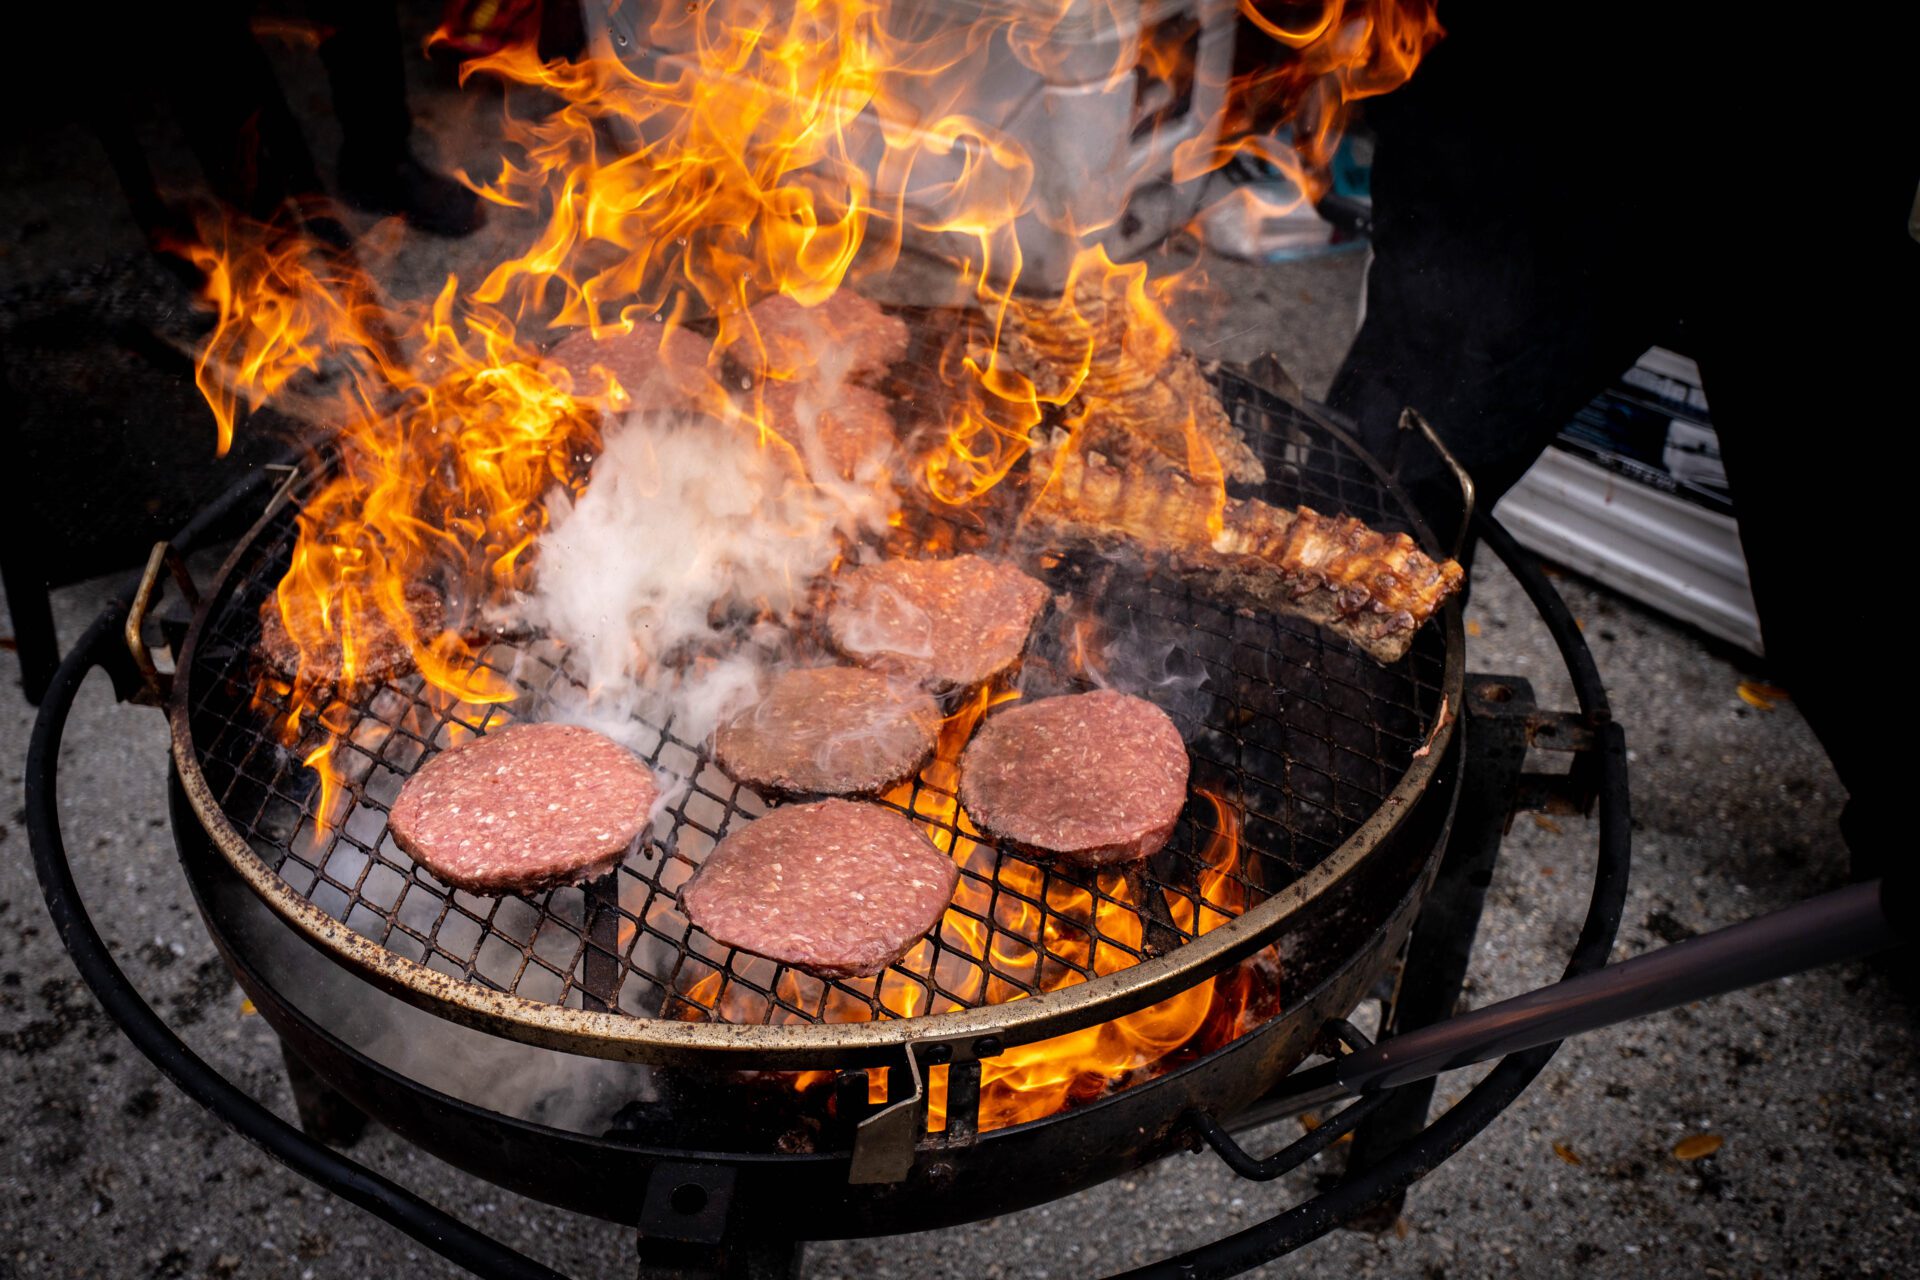 Grill with hamburgers and ribs